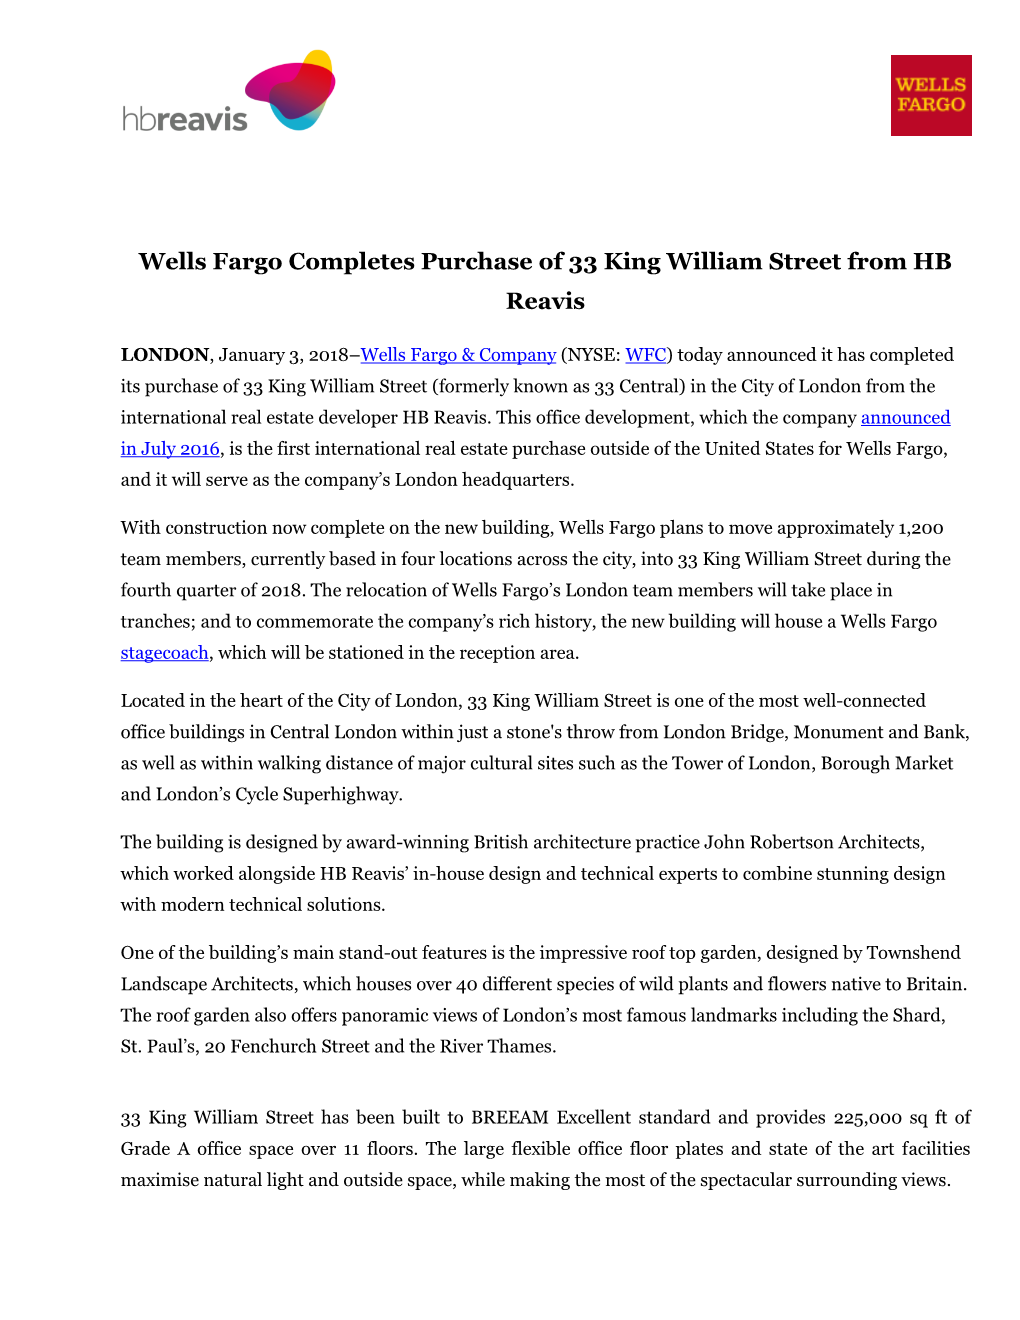 Wells Fargo Completes Purchase of 33 King William Street from HB Reavis